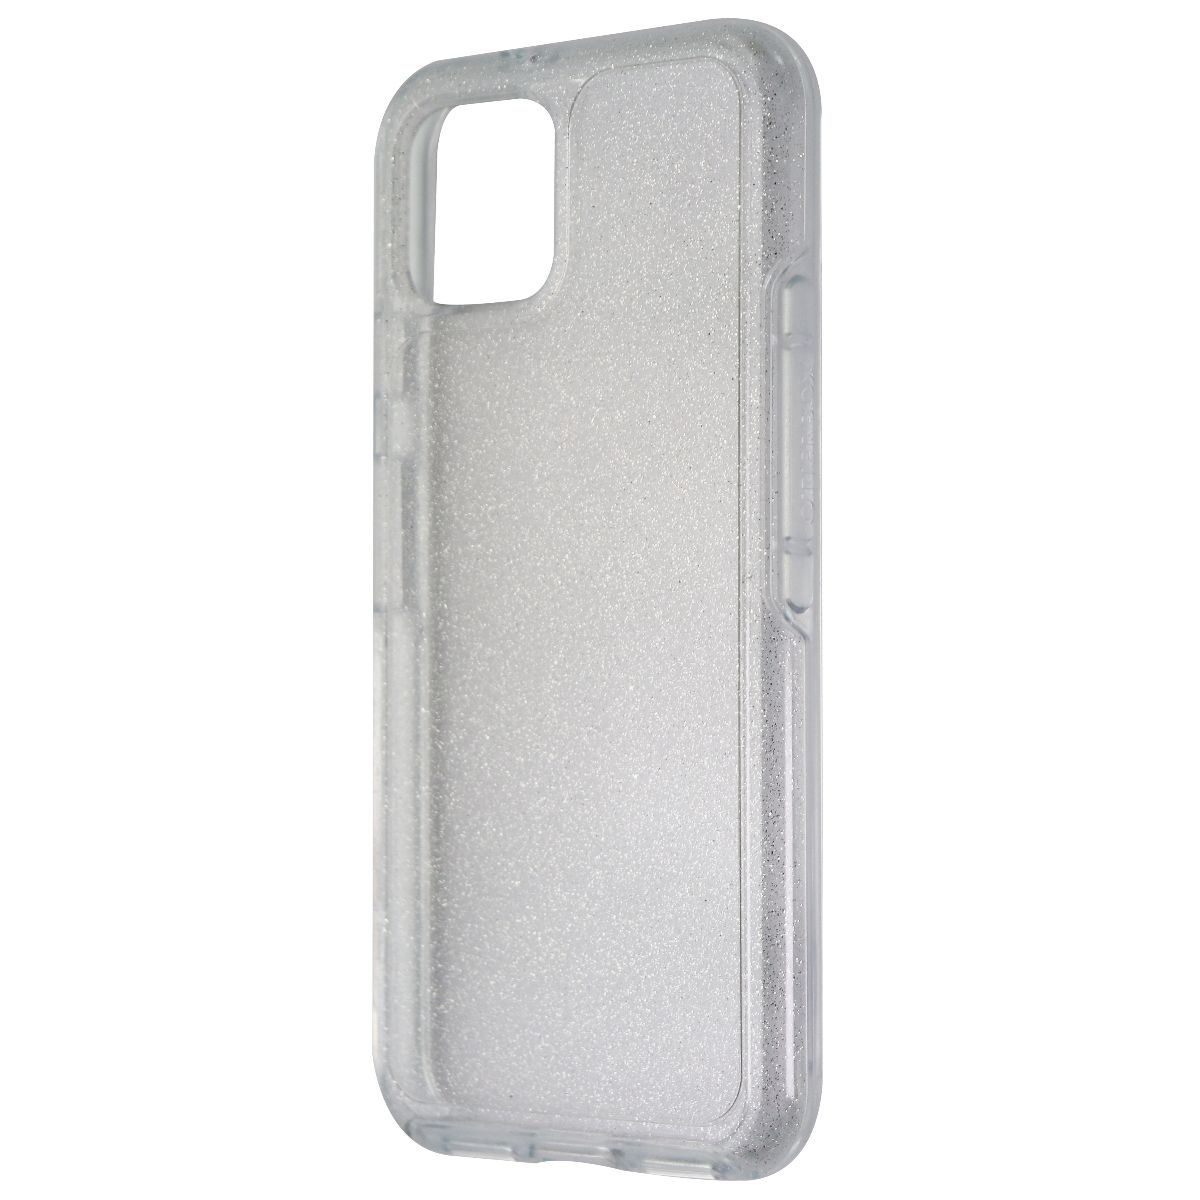 OtterBox Symmetry Series Case for Google Pixel 4 Smartphone - Stardust/Clear (Used) - image 1 of 3